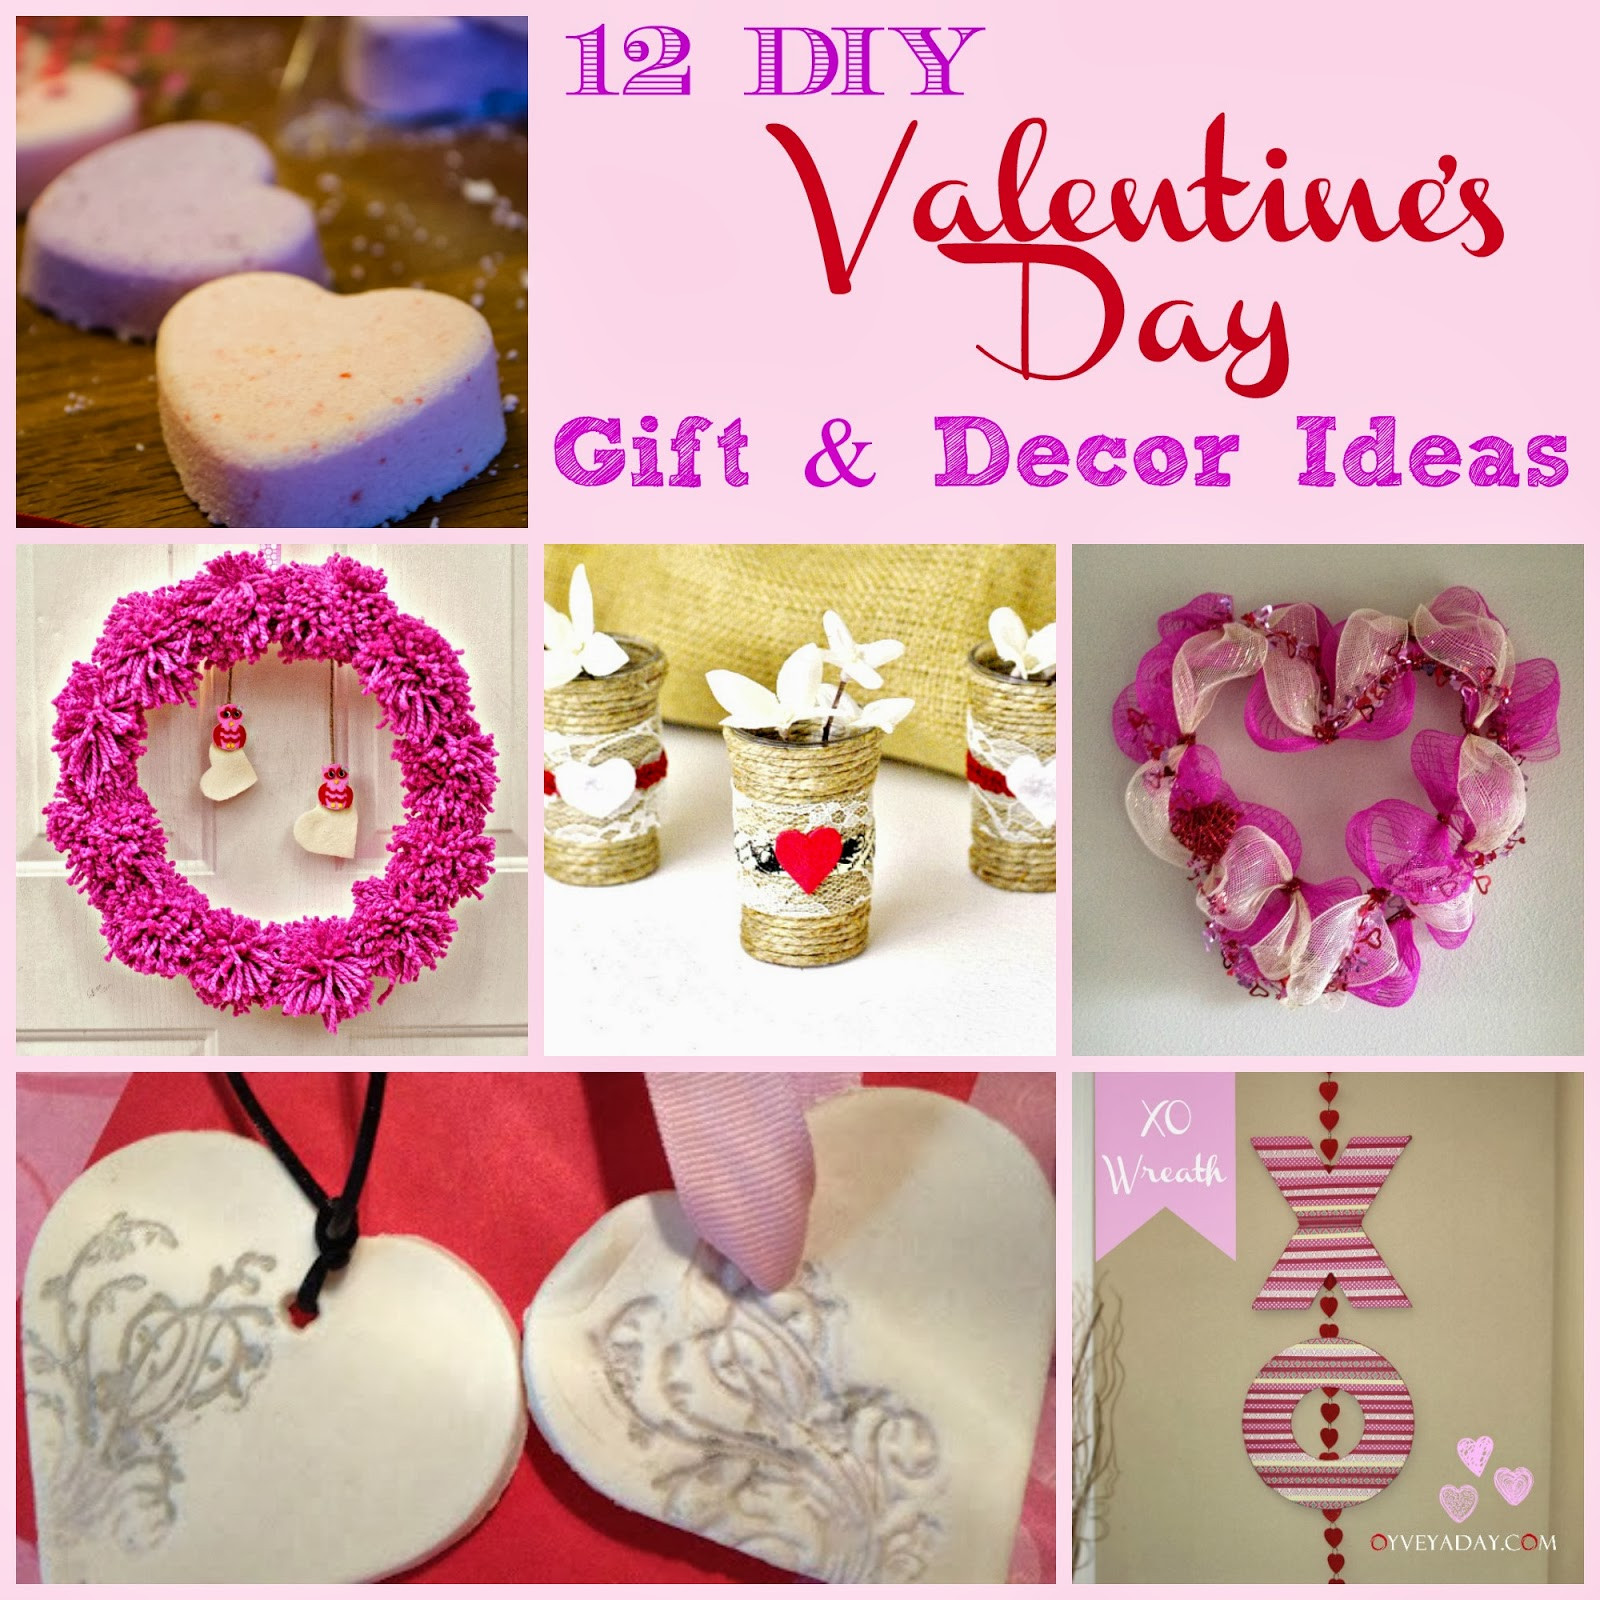 Valentine Day Gift Ideas
 12 DIY Valentine s Day Gift & Decor Ideas Outnumbered 3 to 1